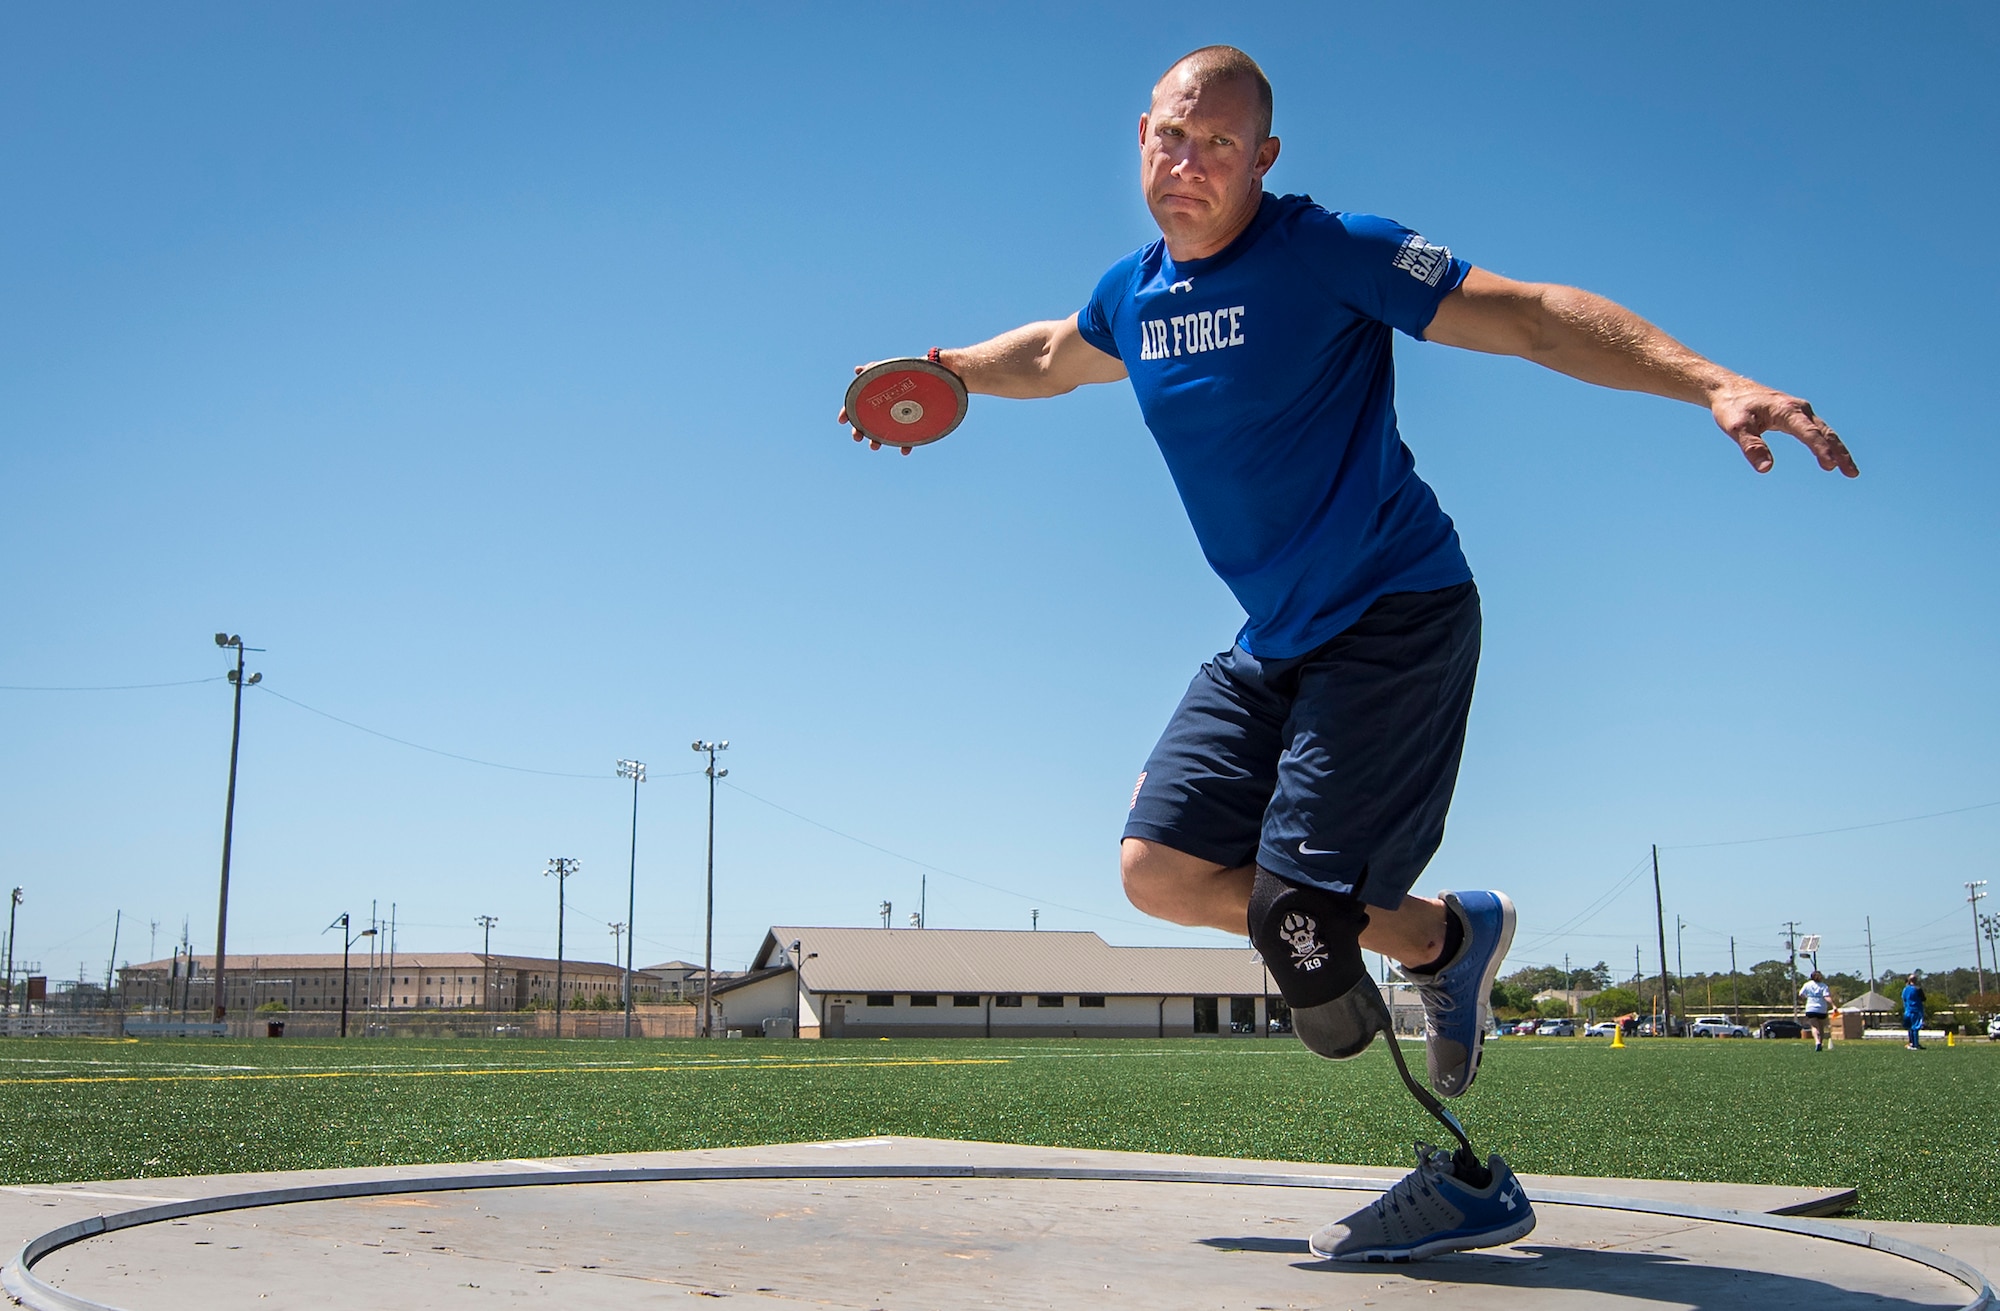 Ben Seekell, a Warrior Games athlete, goes into his discus rotation during a track and field session at the U.S. Air Force team’s training camp at Eglin Air Force Base, Fla., April 16, 2018. The base-hosted, week-long Warrior Games training camp is the last team practice session before the yearly competition in June. (U.S. Air Force photo by Samuel King Jr.)